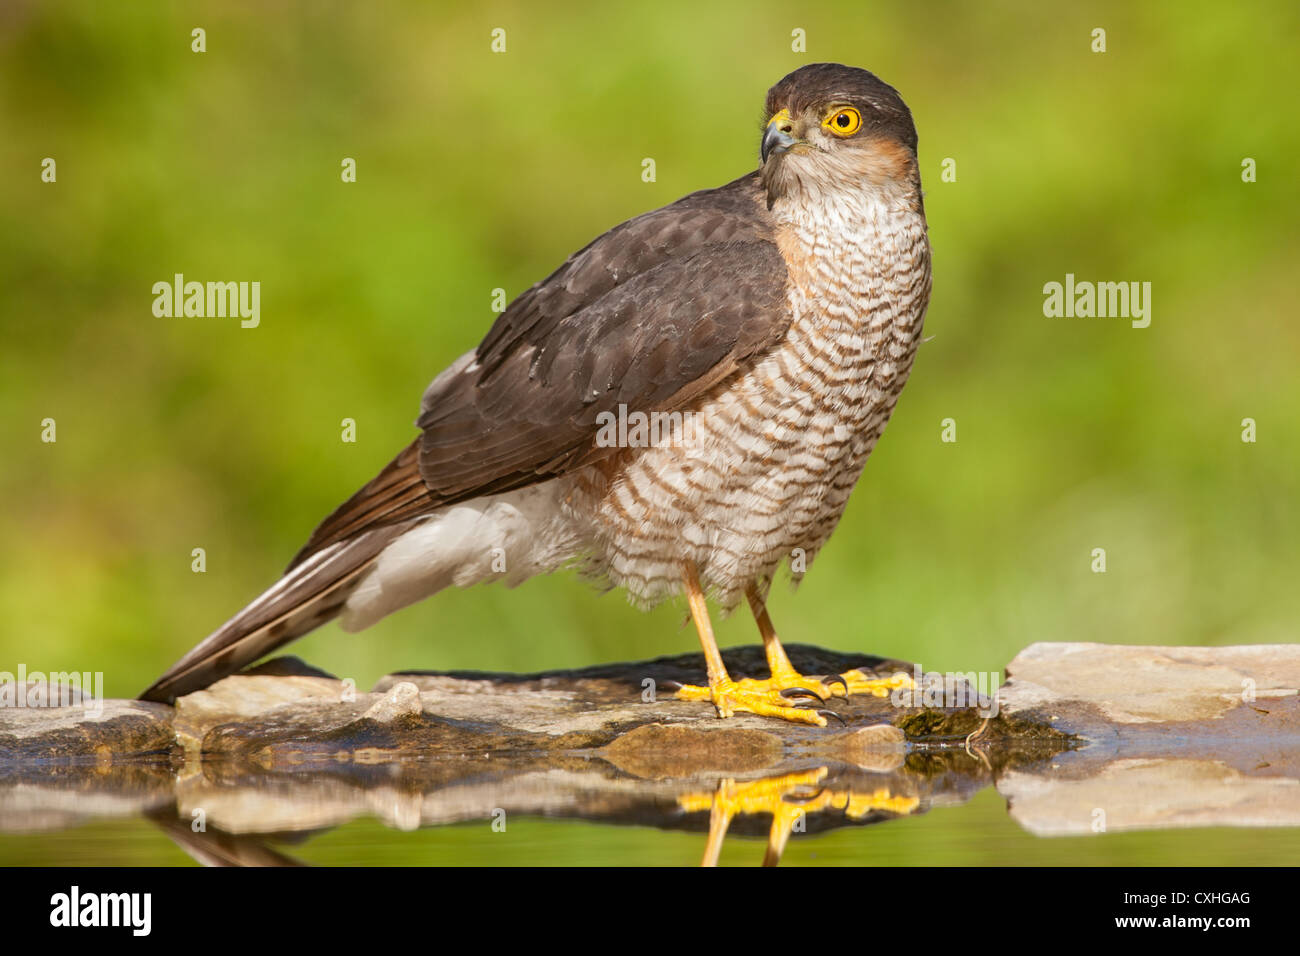 Eurasian sparrowhawk (Accipiter nisus) at the edge of a pool, side view Stock Photo